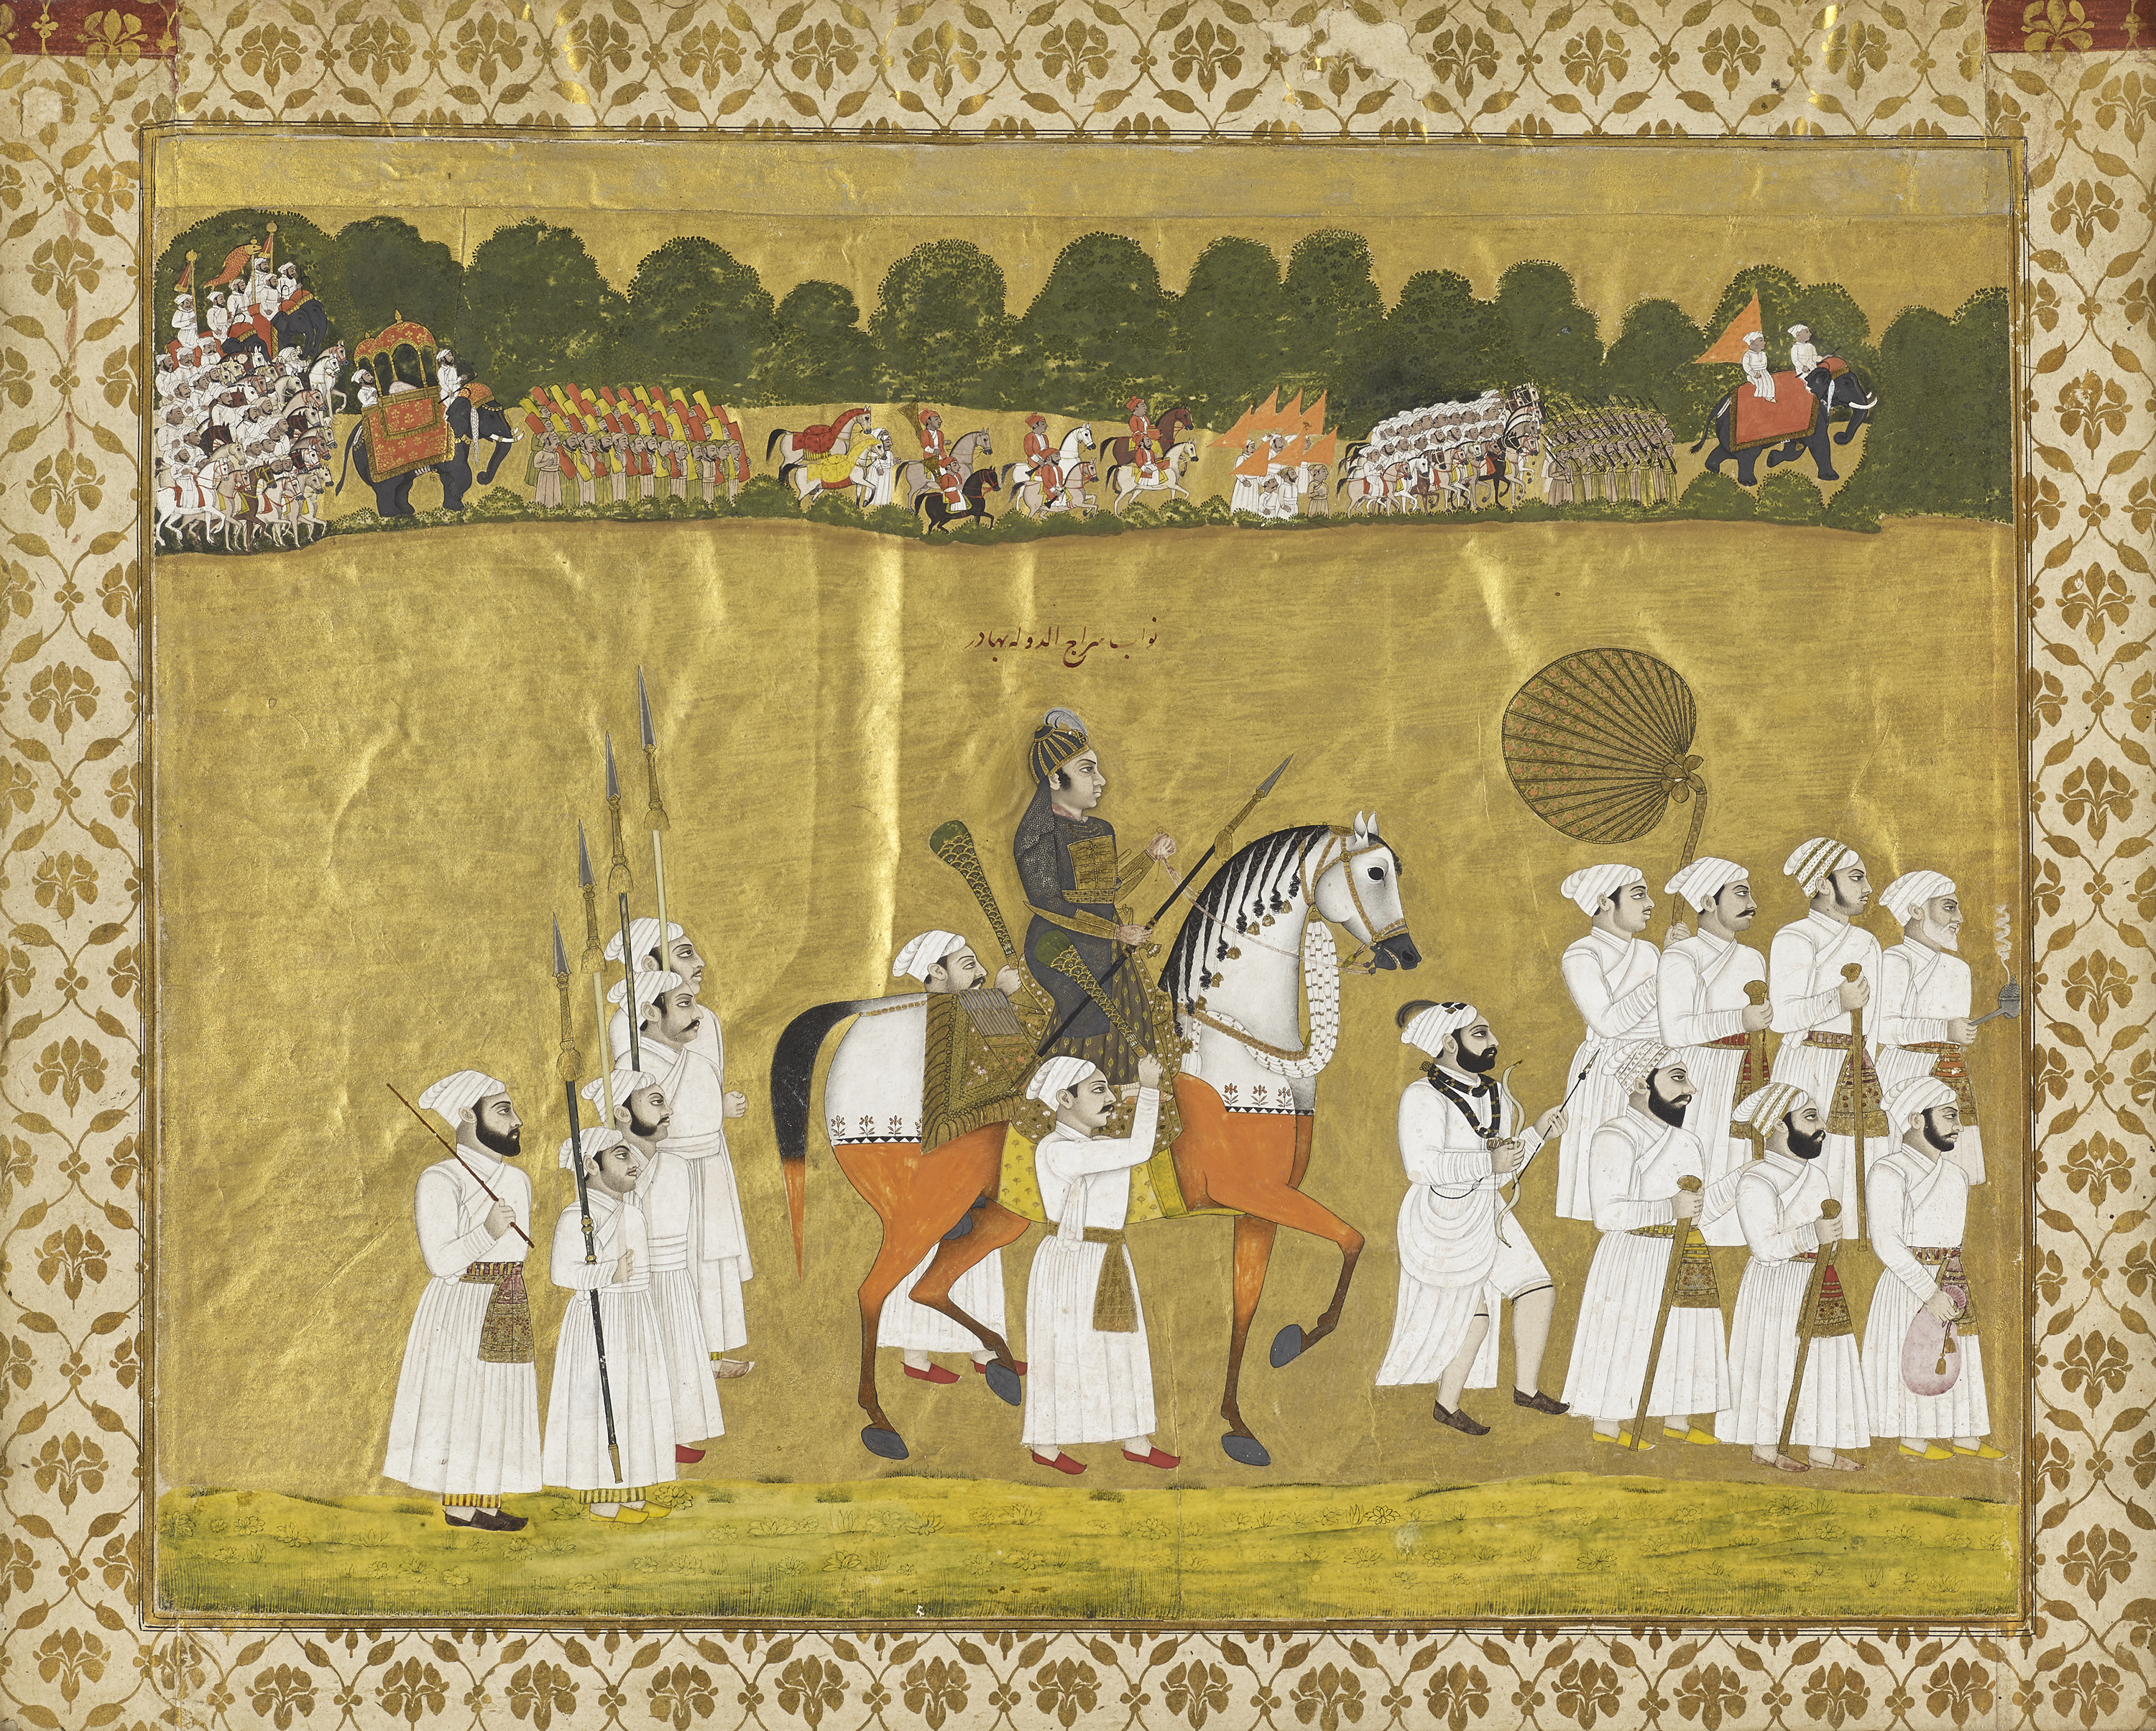 Miniature painting: Nawab Siraj al-Daula on horseback in a private procession with the state retinue depicted in the background, by a Murshidabad artist, circa 1756-57.  Photography by John McKenzie for Lyon & Turnbull Fine Art Valuers.